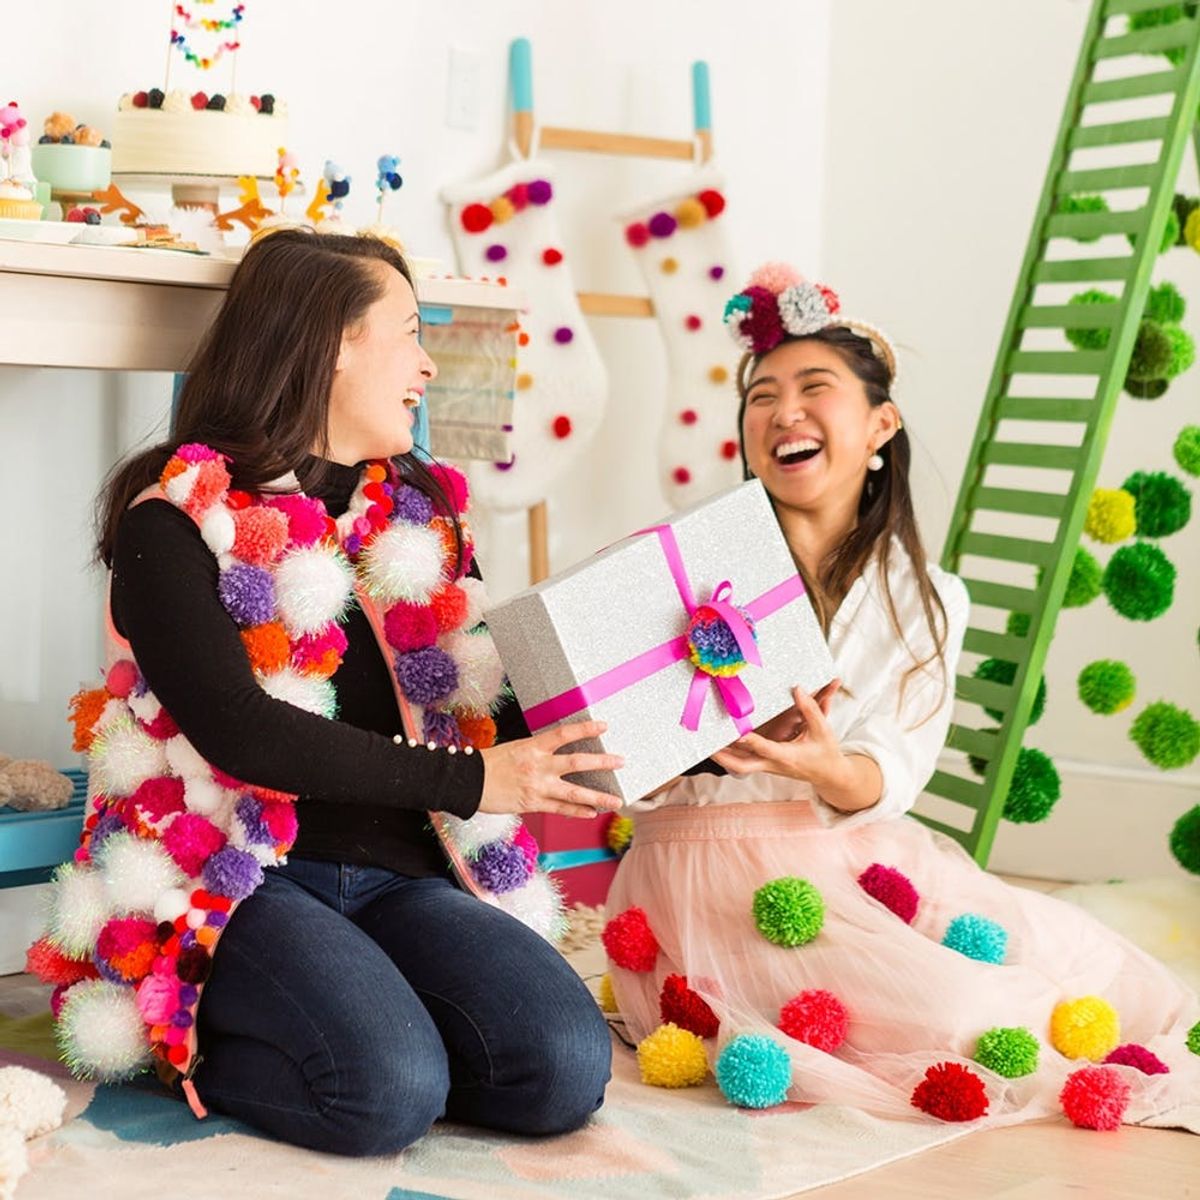 How to Bring the Pom-Pom Christmas Decor Trend to Your Holiday Party